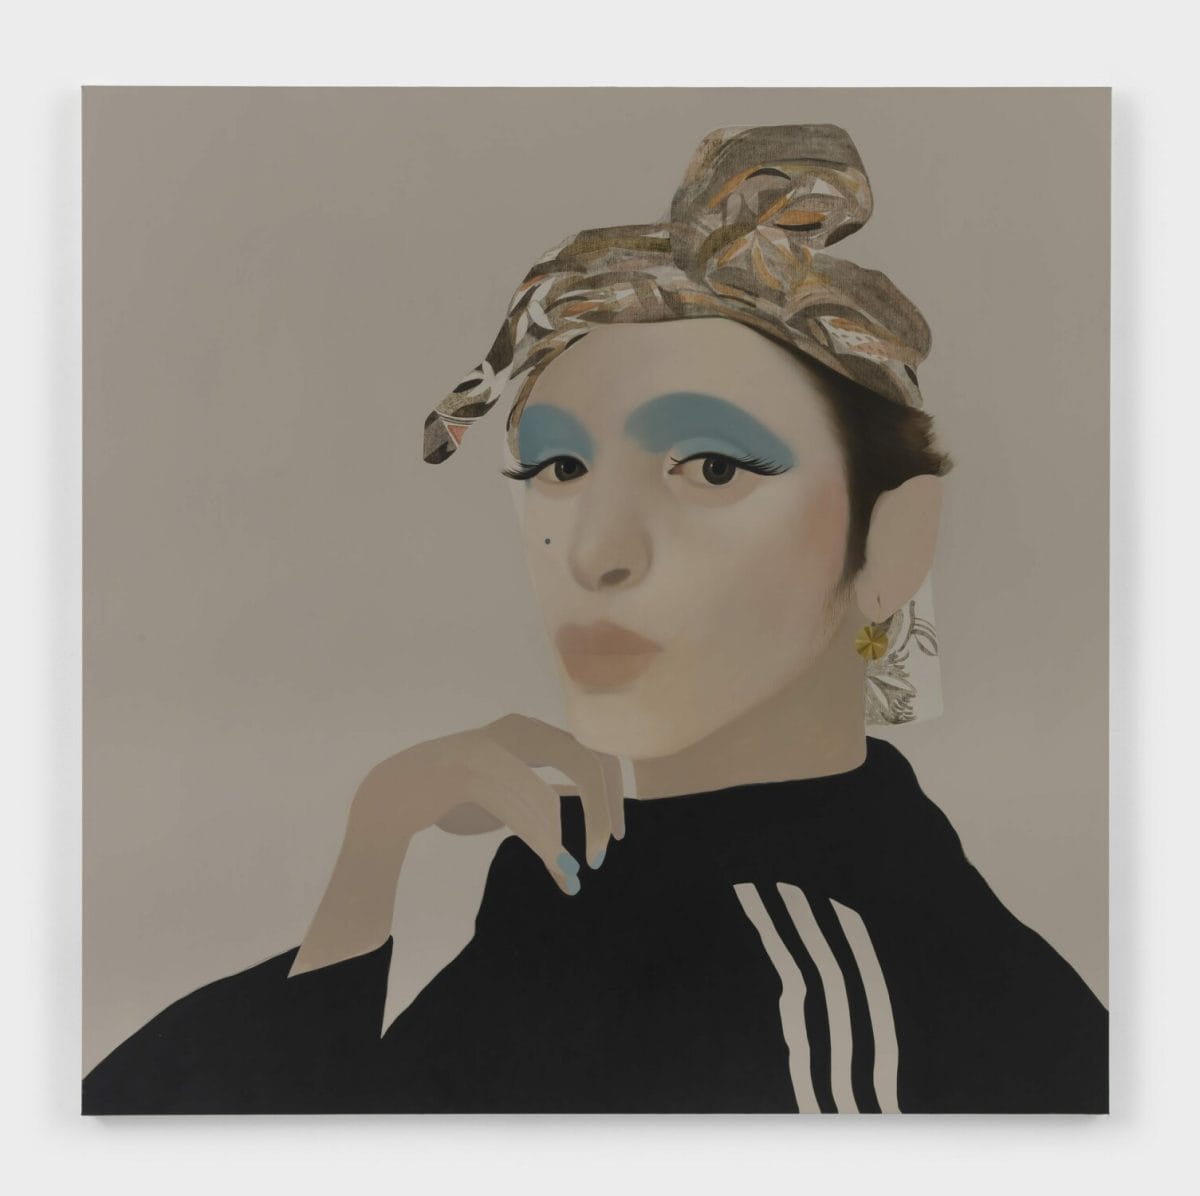 Sarah Ball, 'Laurent', 2021. Oil on linen, 160 x 160cm (63 x 63in). Copyright Sarah Ball. Courtesy the artist and Stephen Friedman Gallery, London. Photo by Todd-White Art Photography.